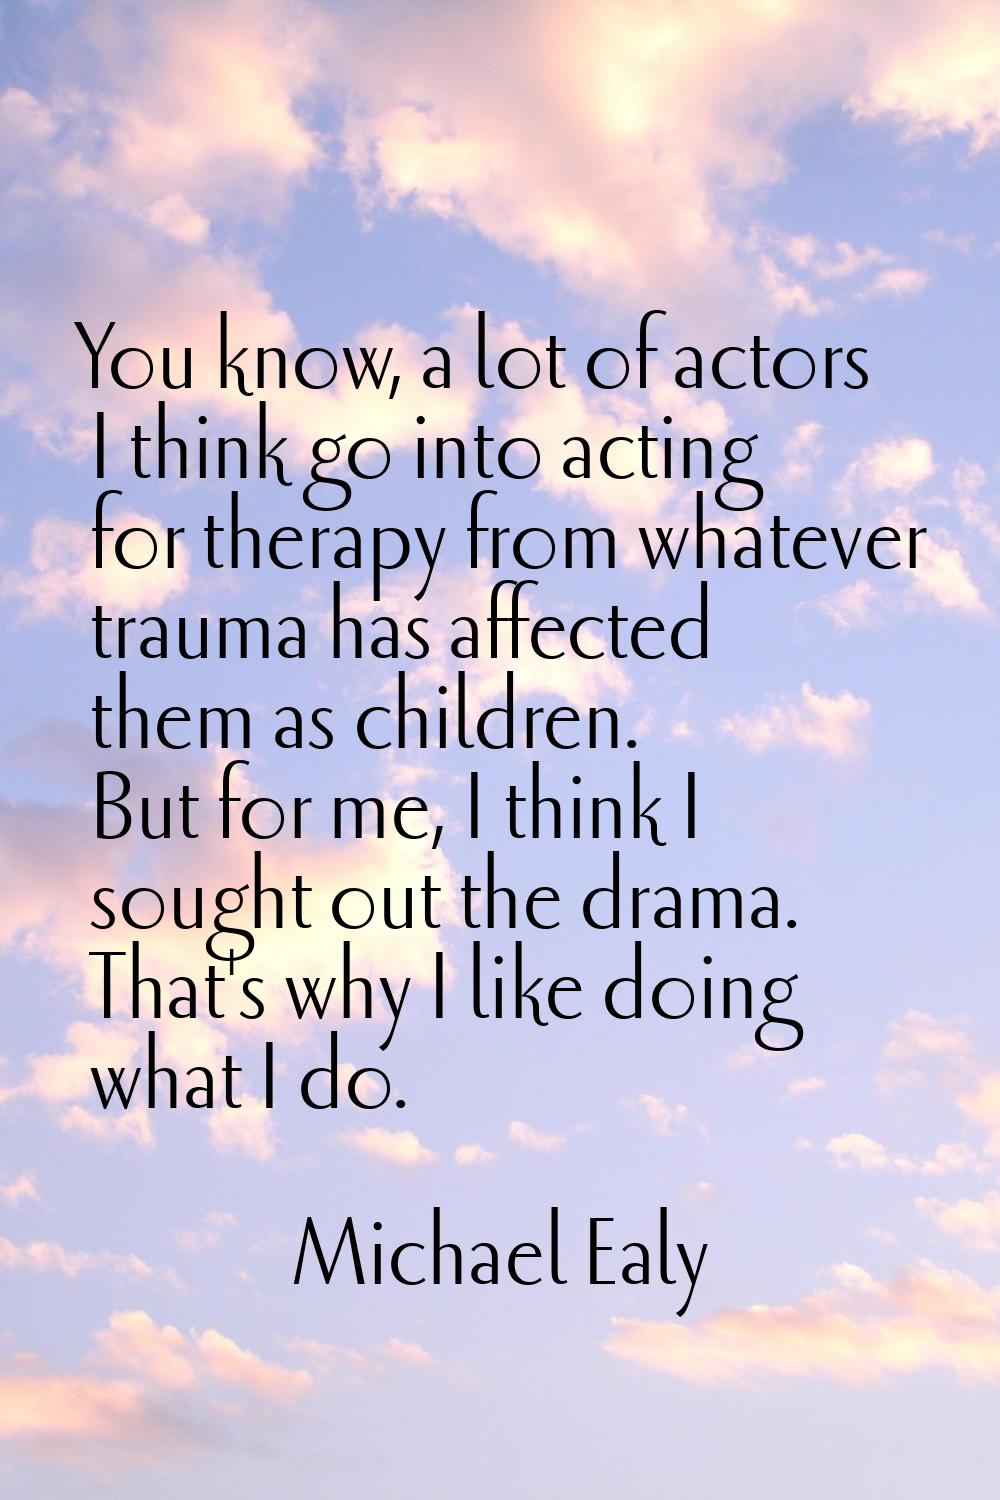 You know, a lot of actors I think go into acting for therapy from whatever trauma has affected them